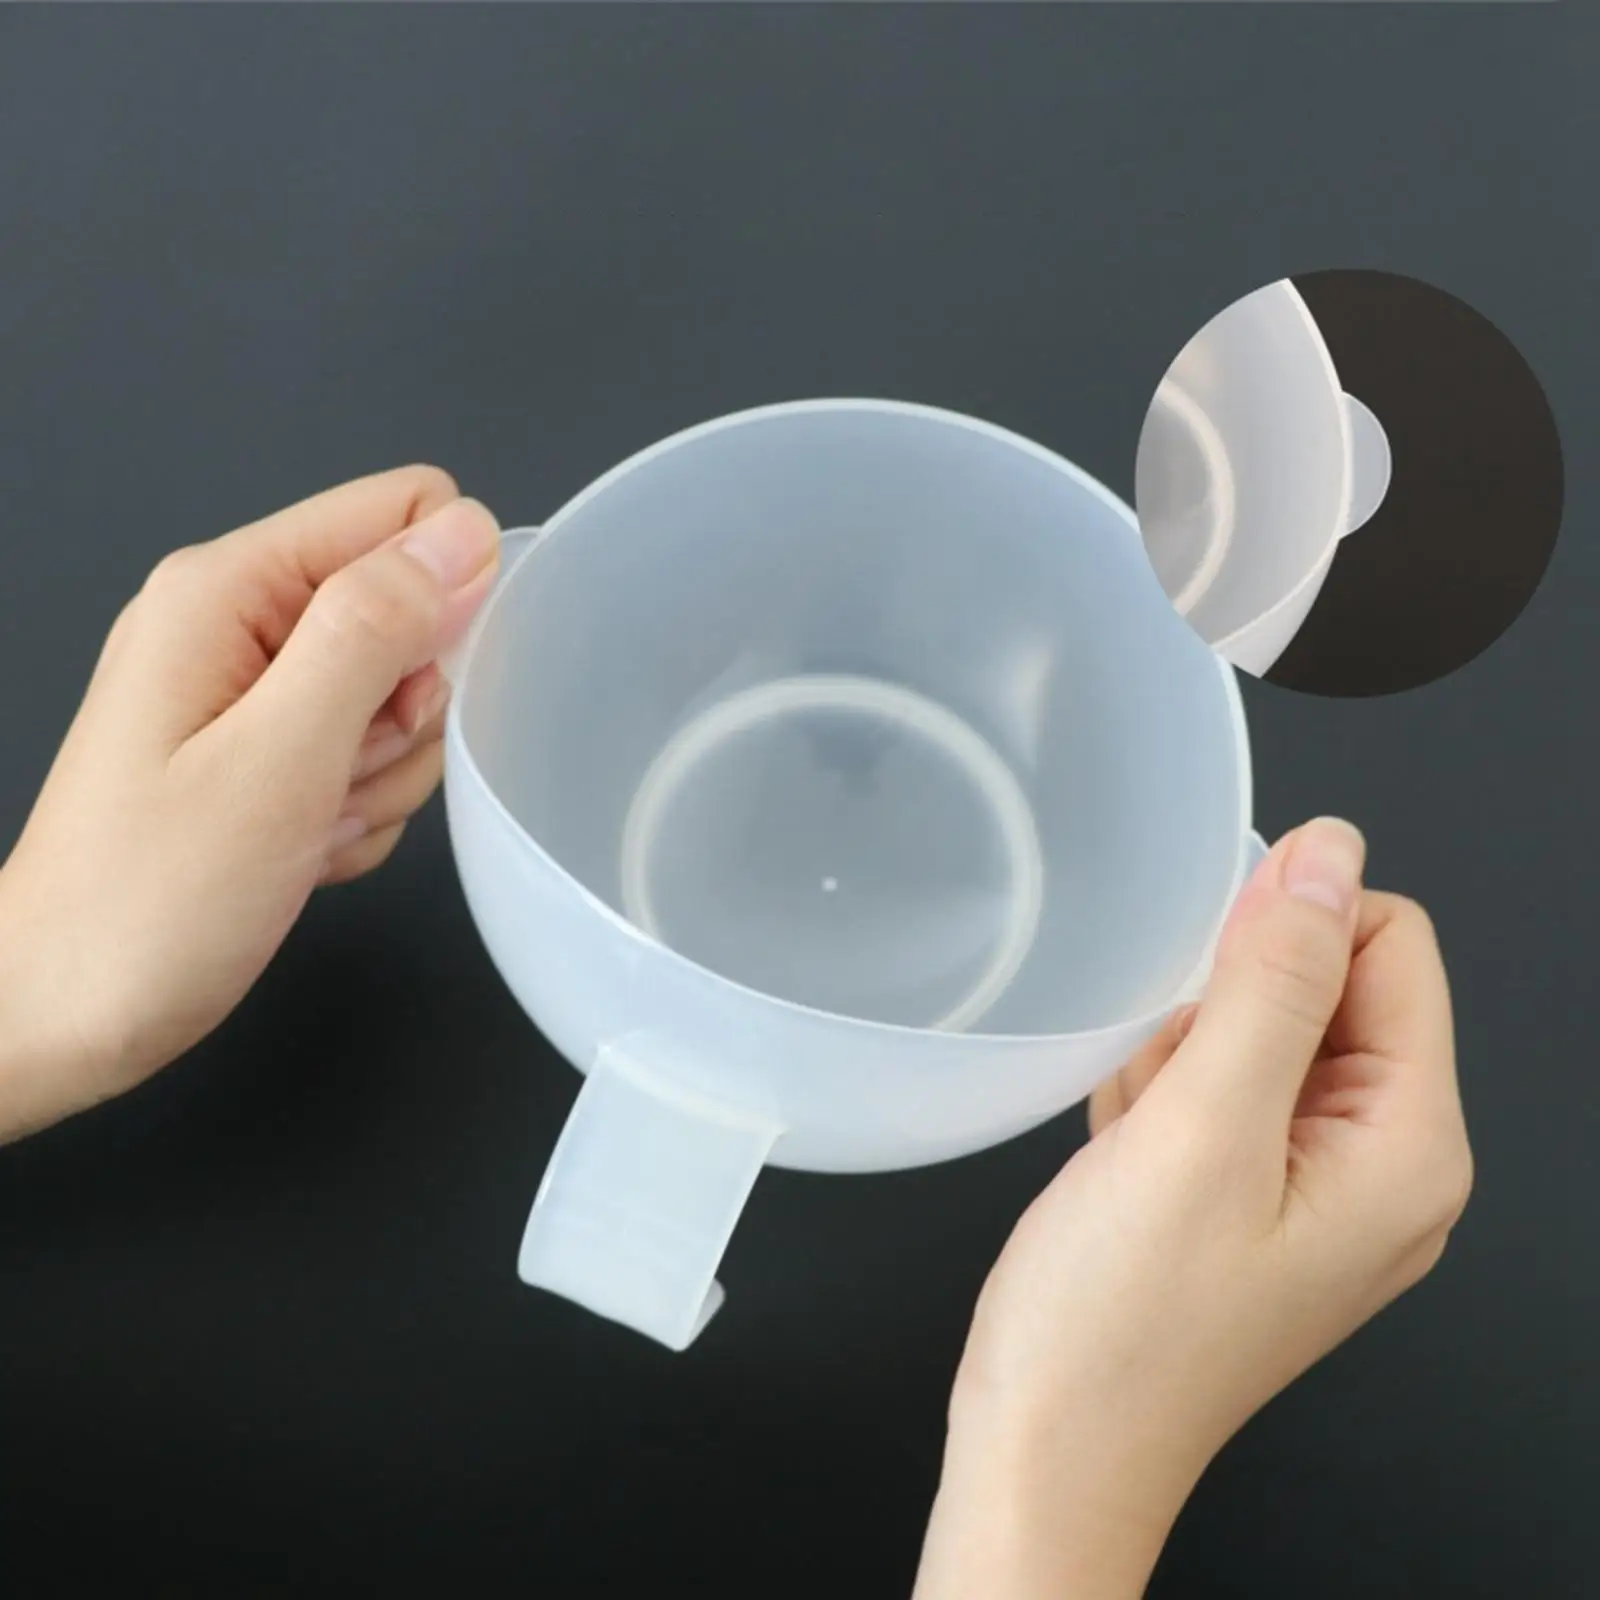 Spill Proof Scoop Bowl Food Auxiliary Tableware with Suction Base Scoop Plates for Disabled with Special Needs Adults